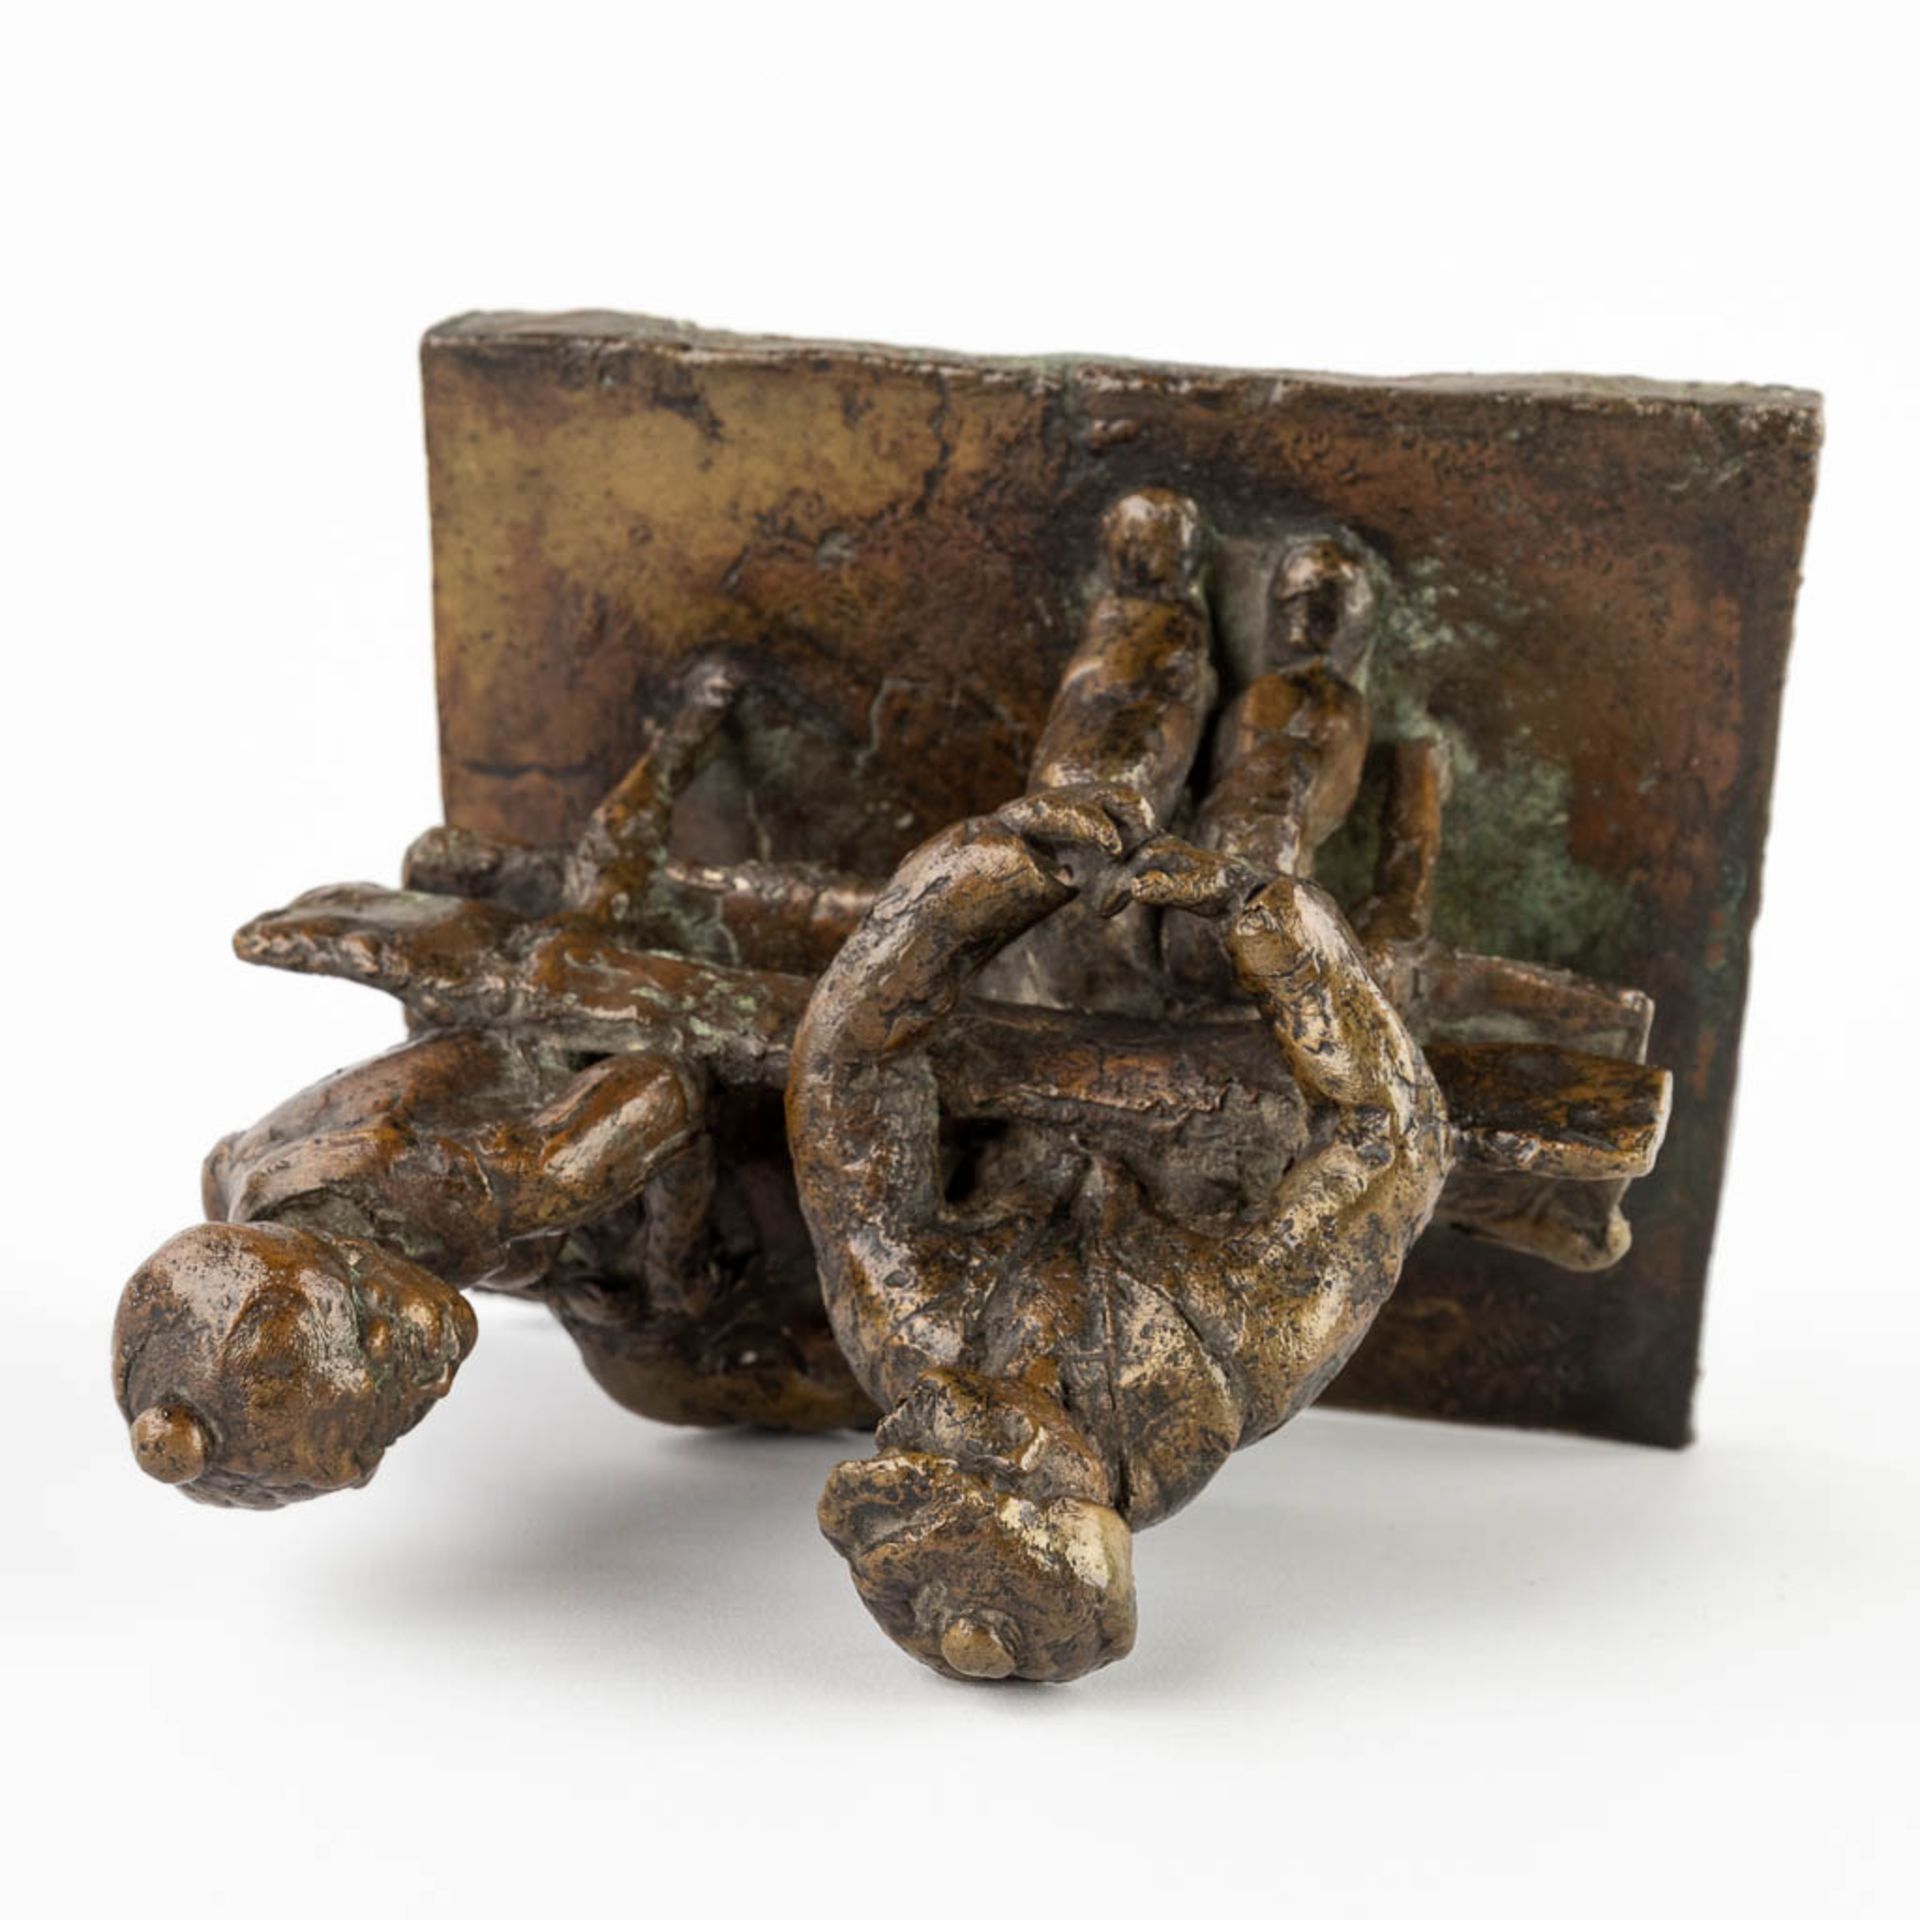 Jos WILMS (1930) 'The Bench' patinated bronze. (19)79. (D:18 x W:22 x H:20 cm) - Image 11 of 14